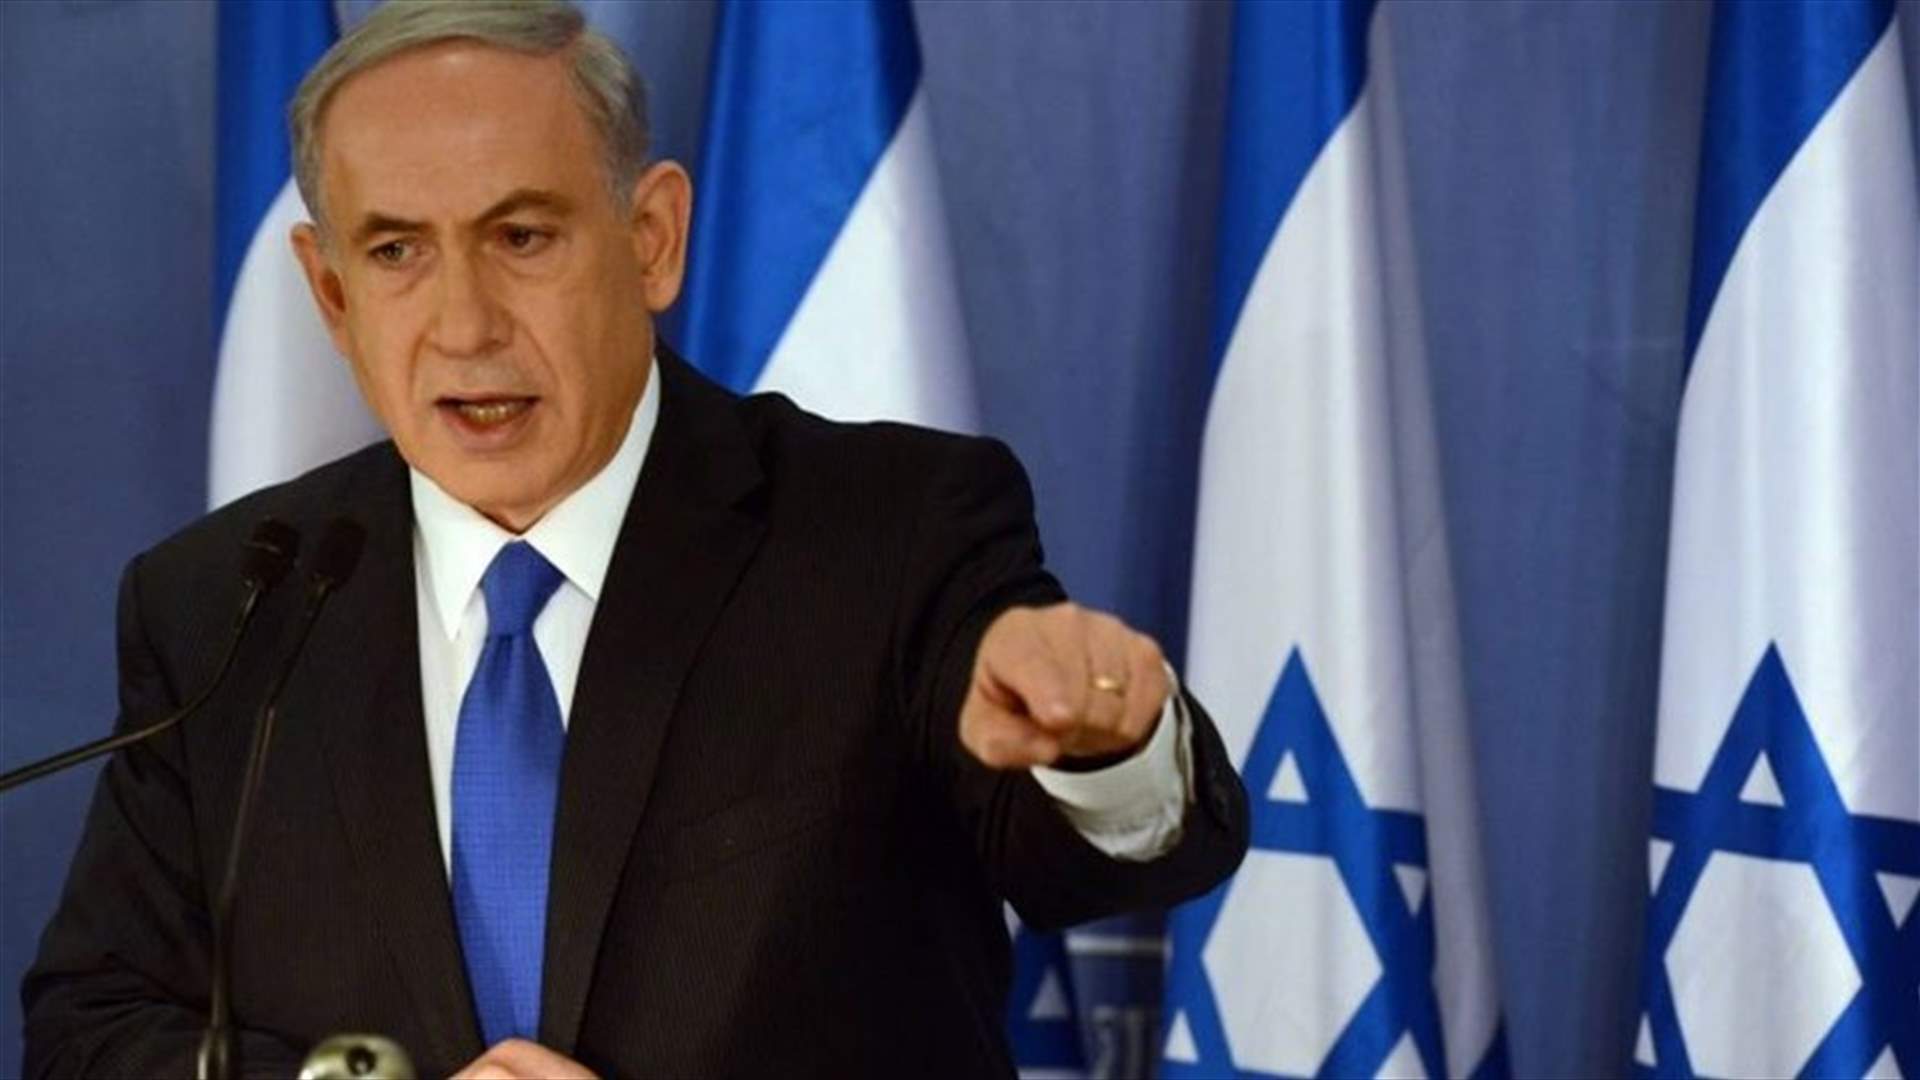 Netanyahu says Israel will continue Syria operations to prevent Iranian entrenchment